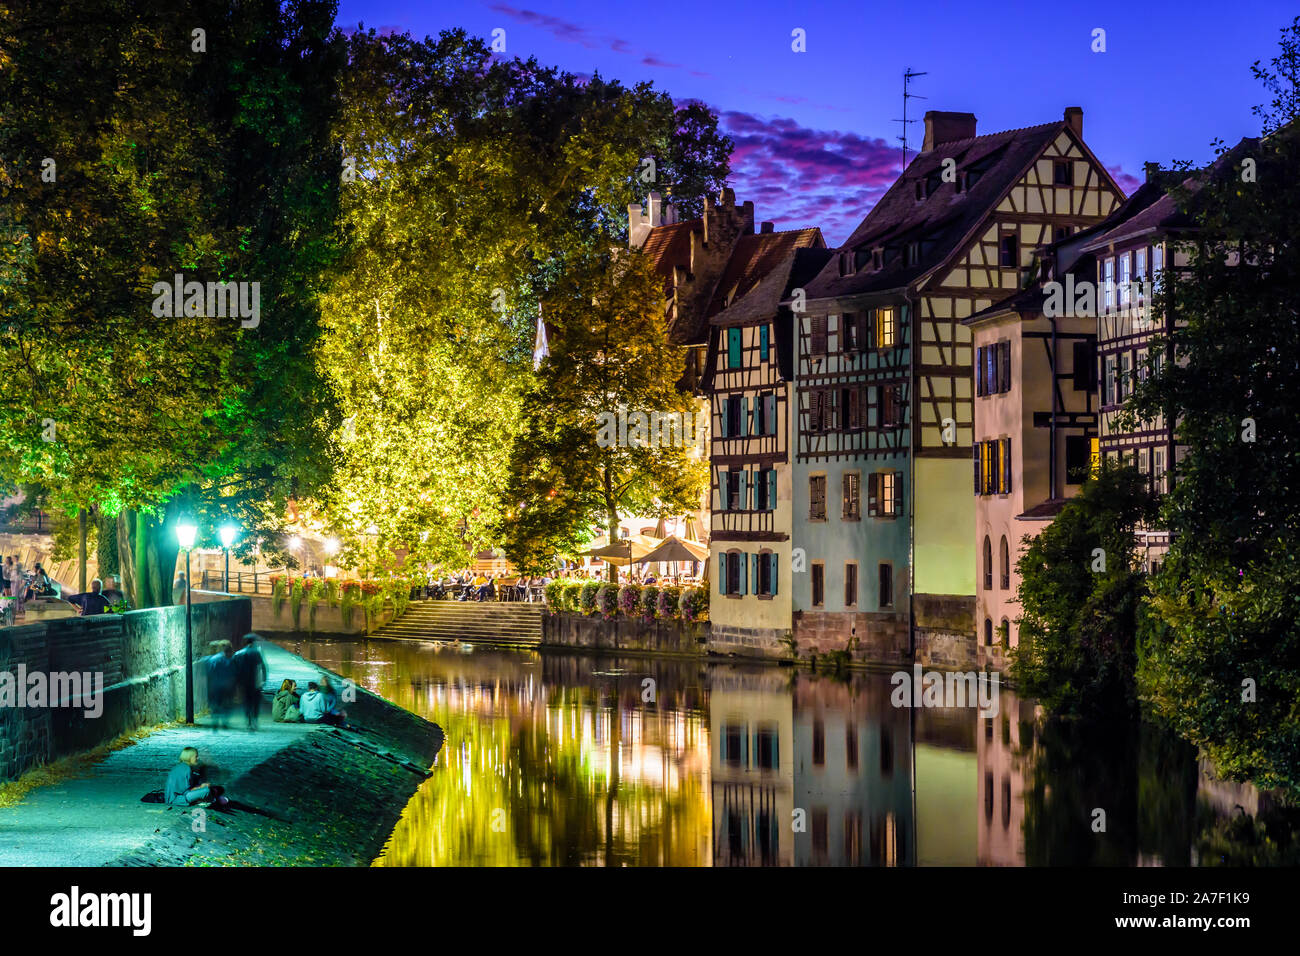 Young people enjoy the canal at night in the Petite France quarter in Strasbourg, France, opposite the half-timbered houses reflecting in the water. Stock Photo